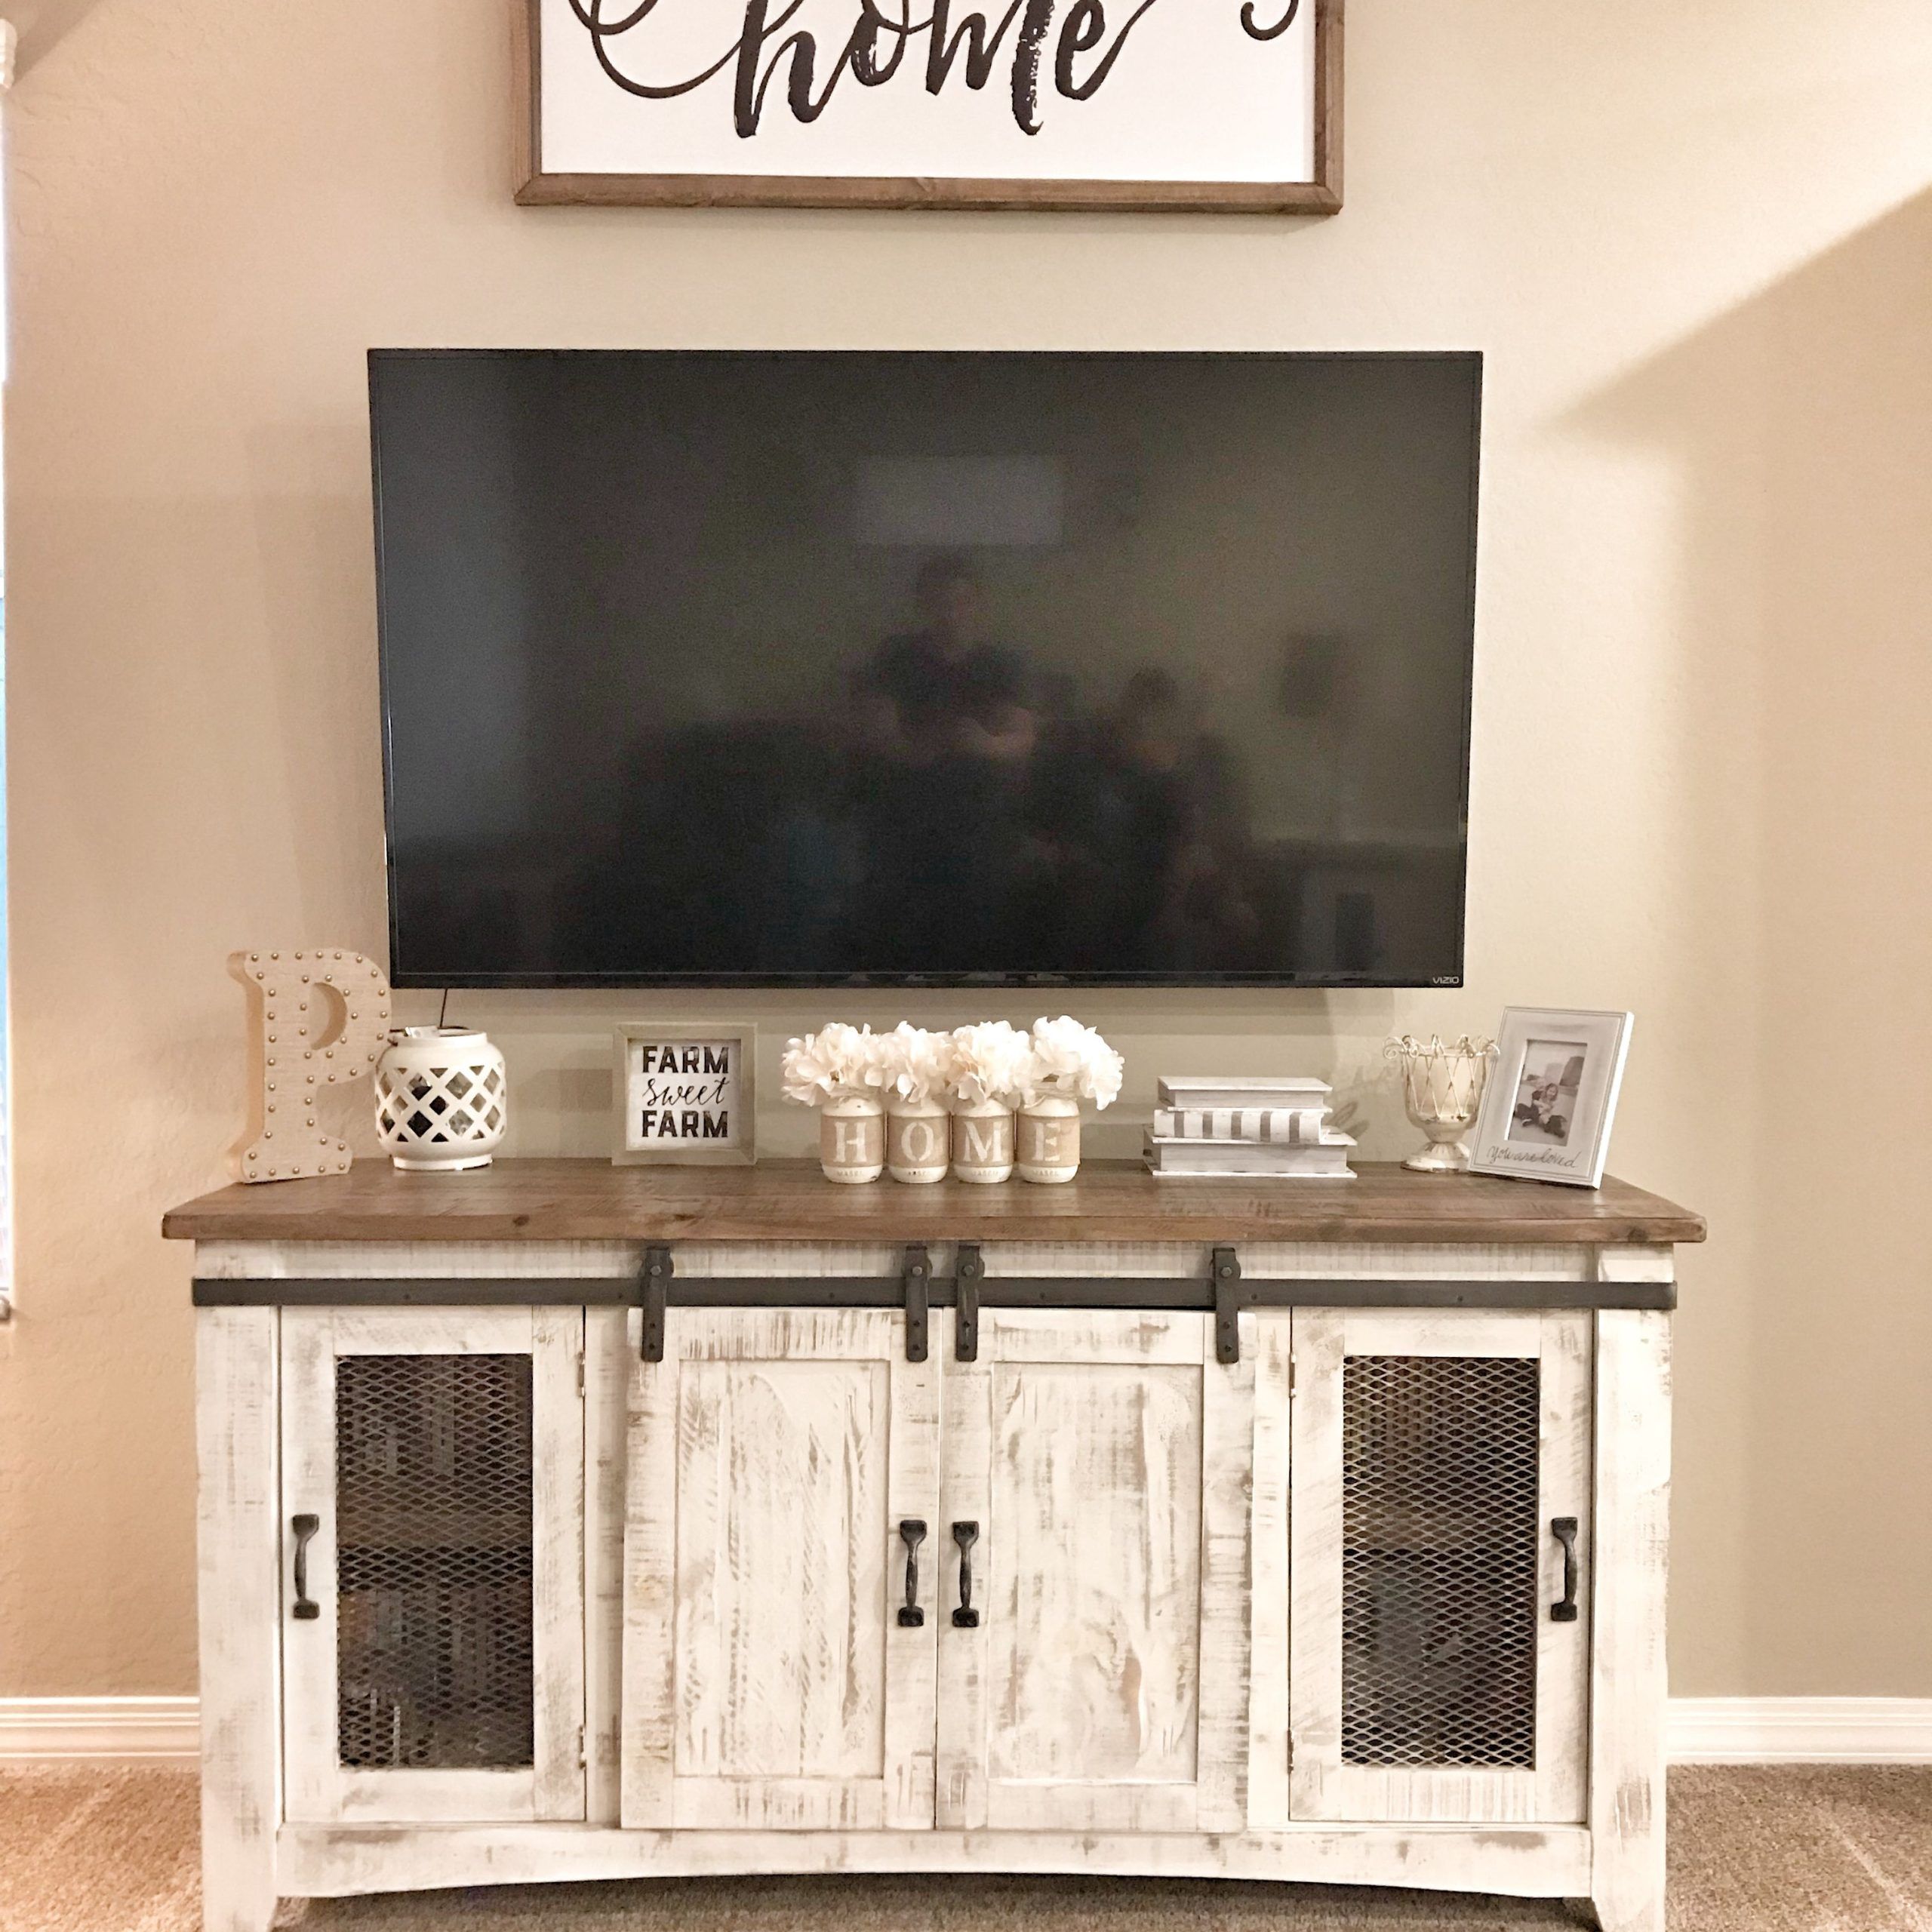 Farmhouse Tv Stand Tv Stand Decor Media Stand Decor | Farm House Living In Modern Farmhouse Rustic Tv Stands (View 12 of 20)